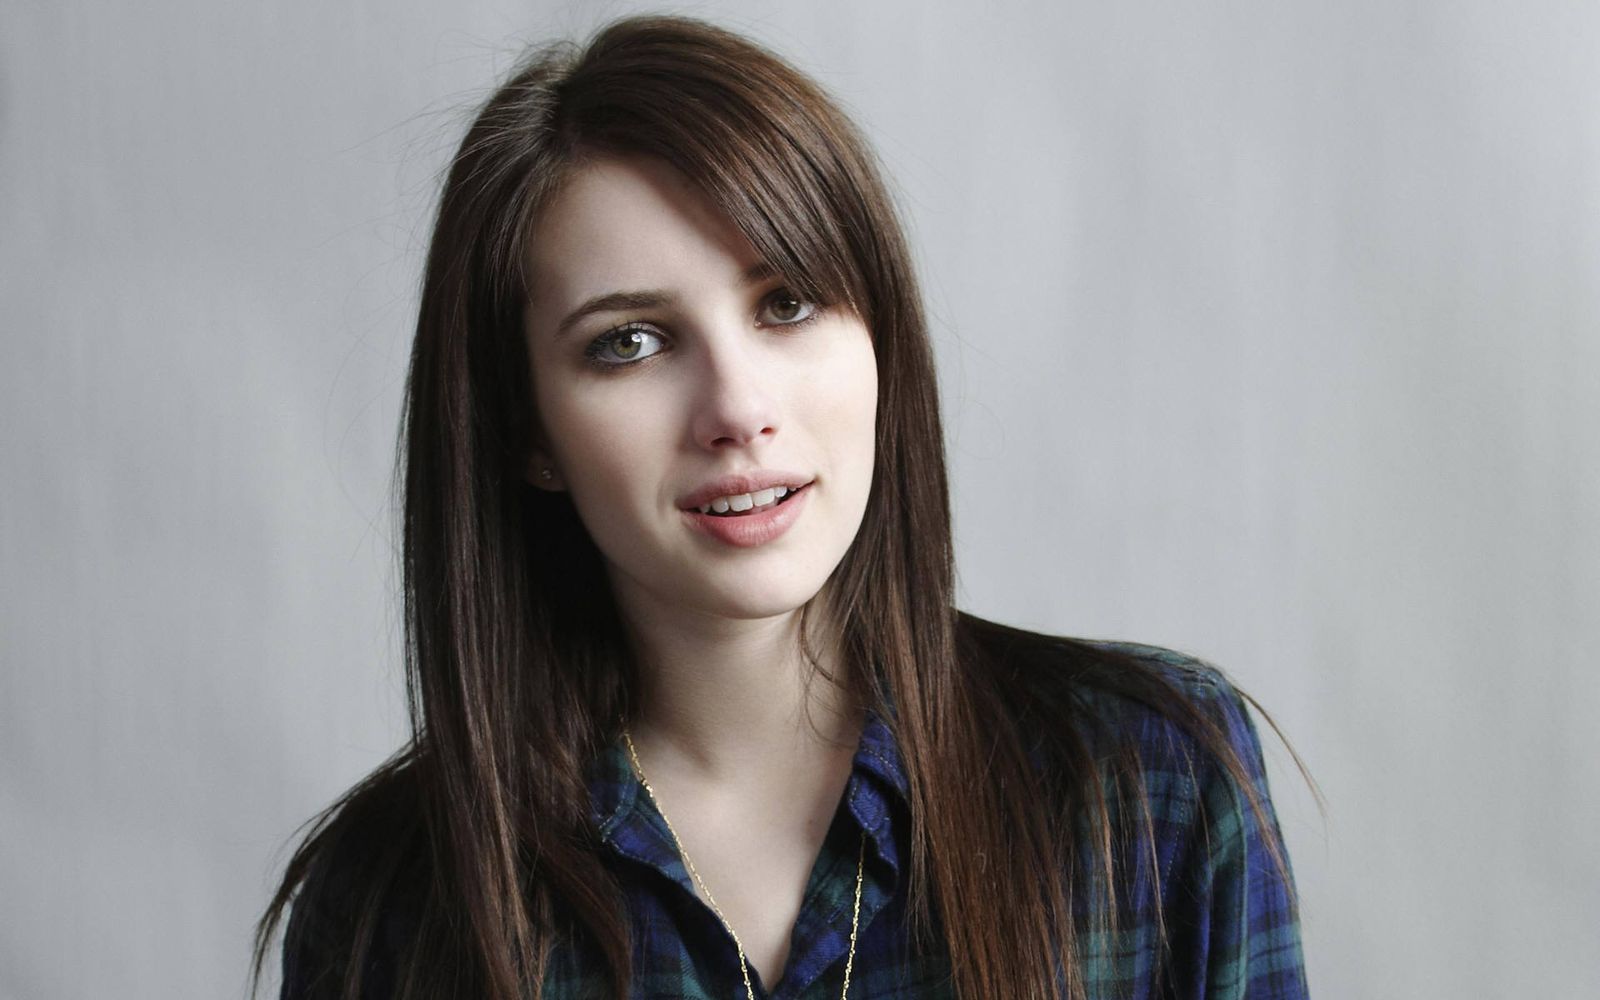 Emma Roberts Intrigued By 'The Shining' While Working For ‘American Horror Story'